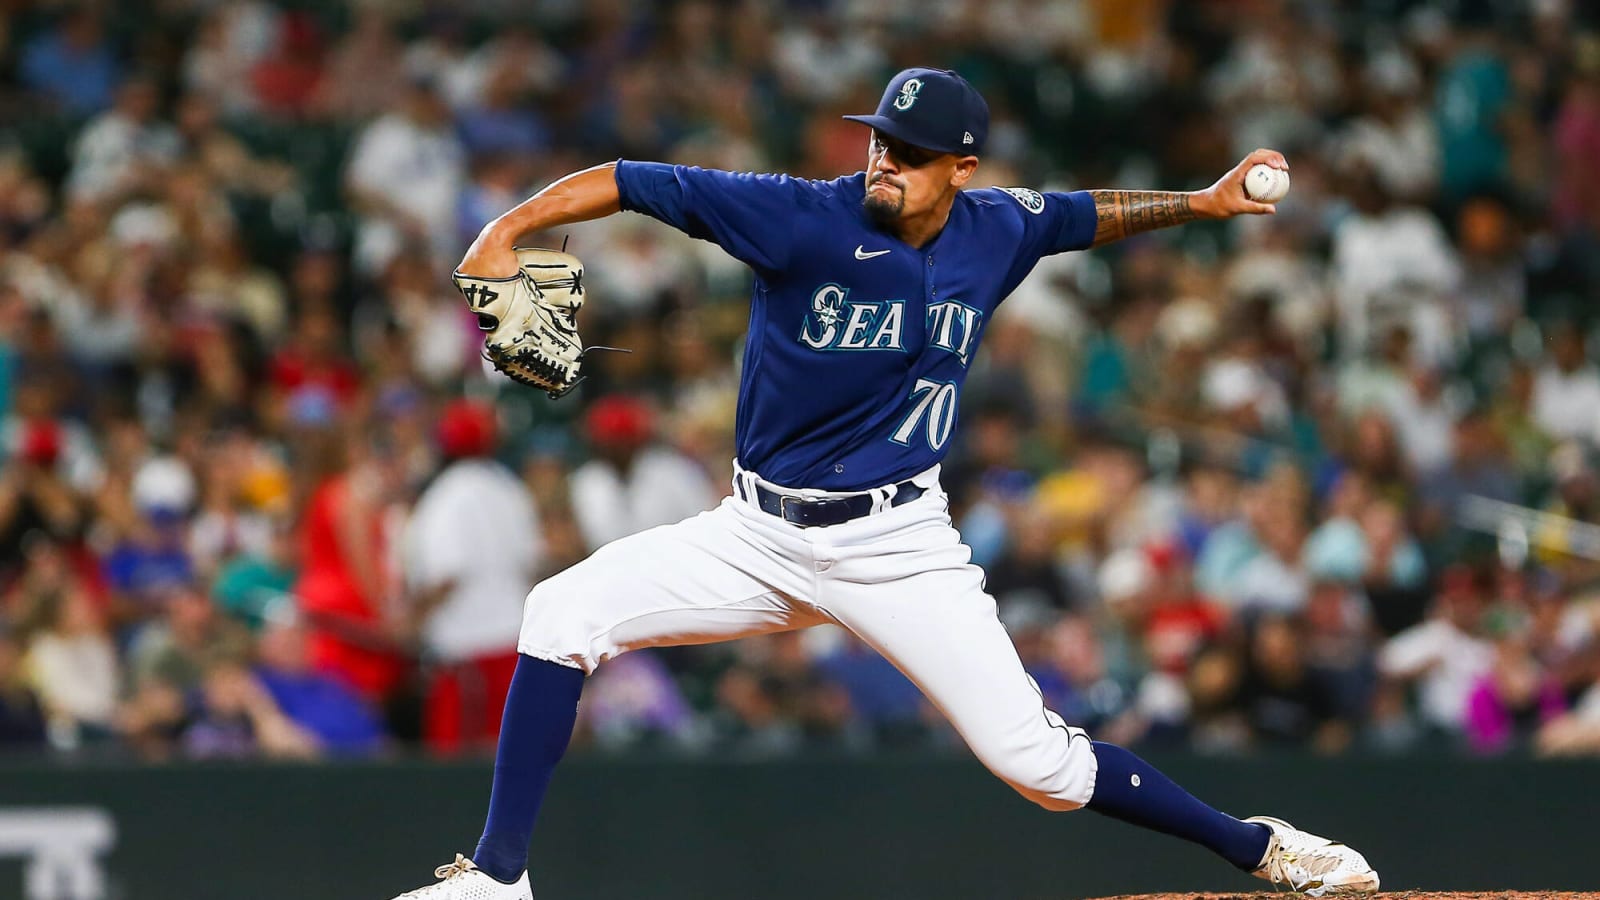 Red Sox claim lefty reliever Brennan Bernardino off waivers from Mariners, transfer Zack Kelly to 60-day injured list